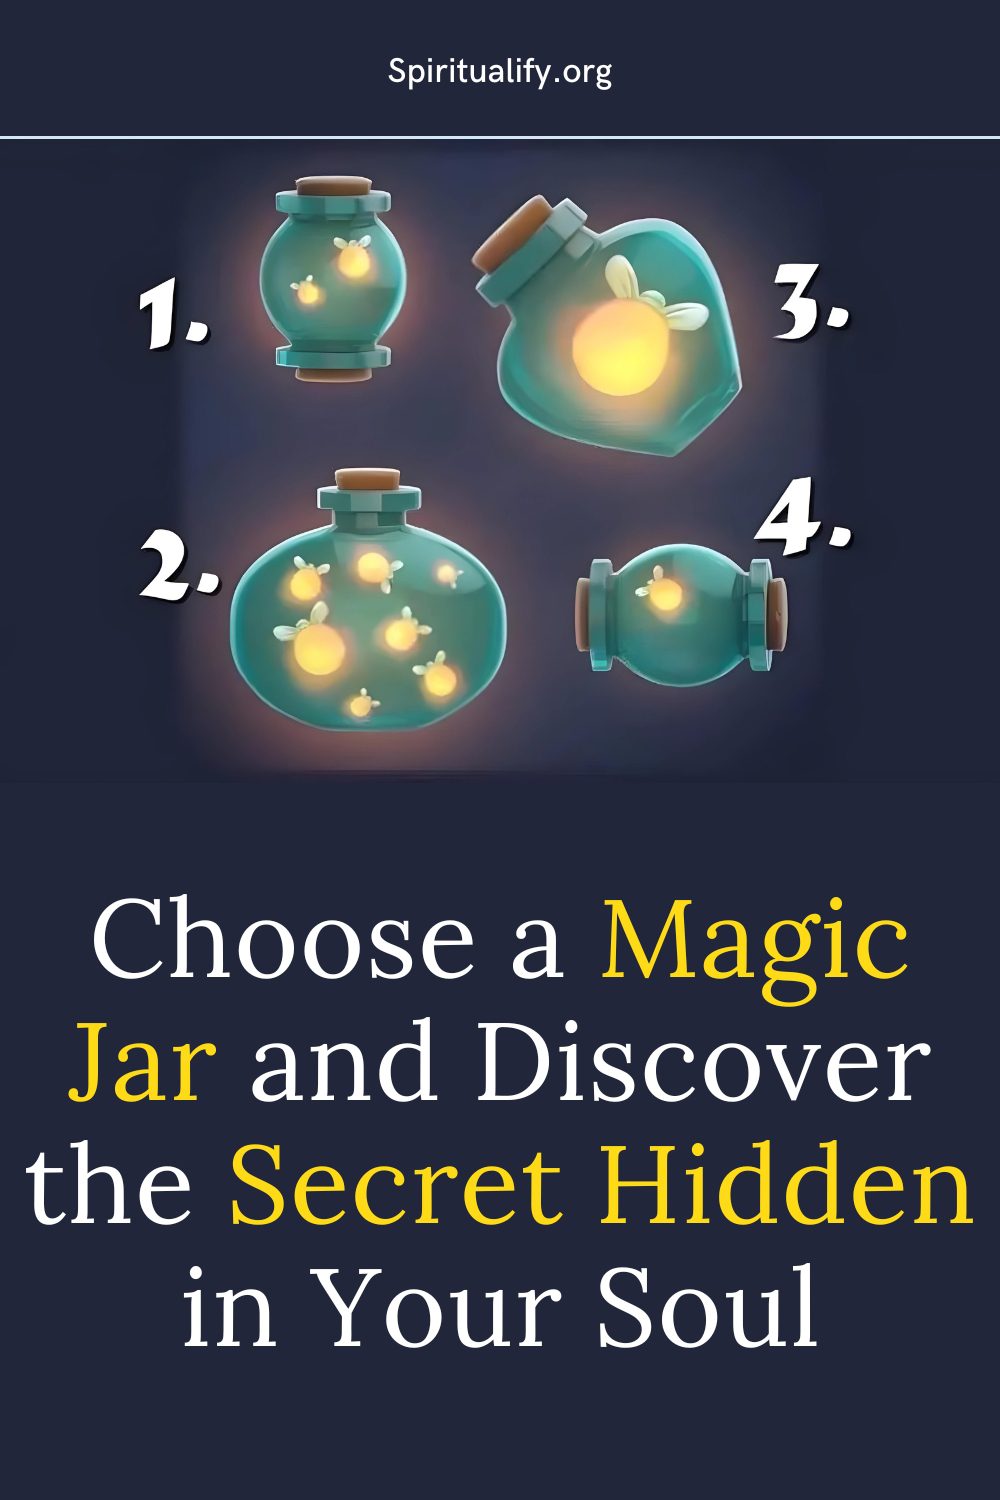 Choose a Magic Jar and Discover the Secret Hidden in Your Soul Pin